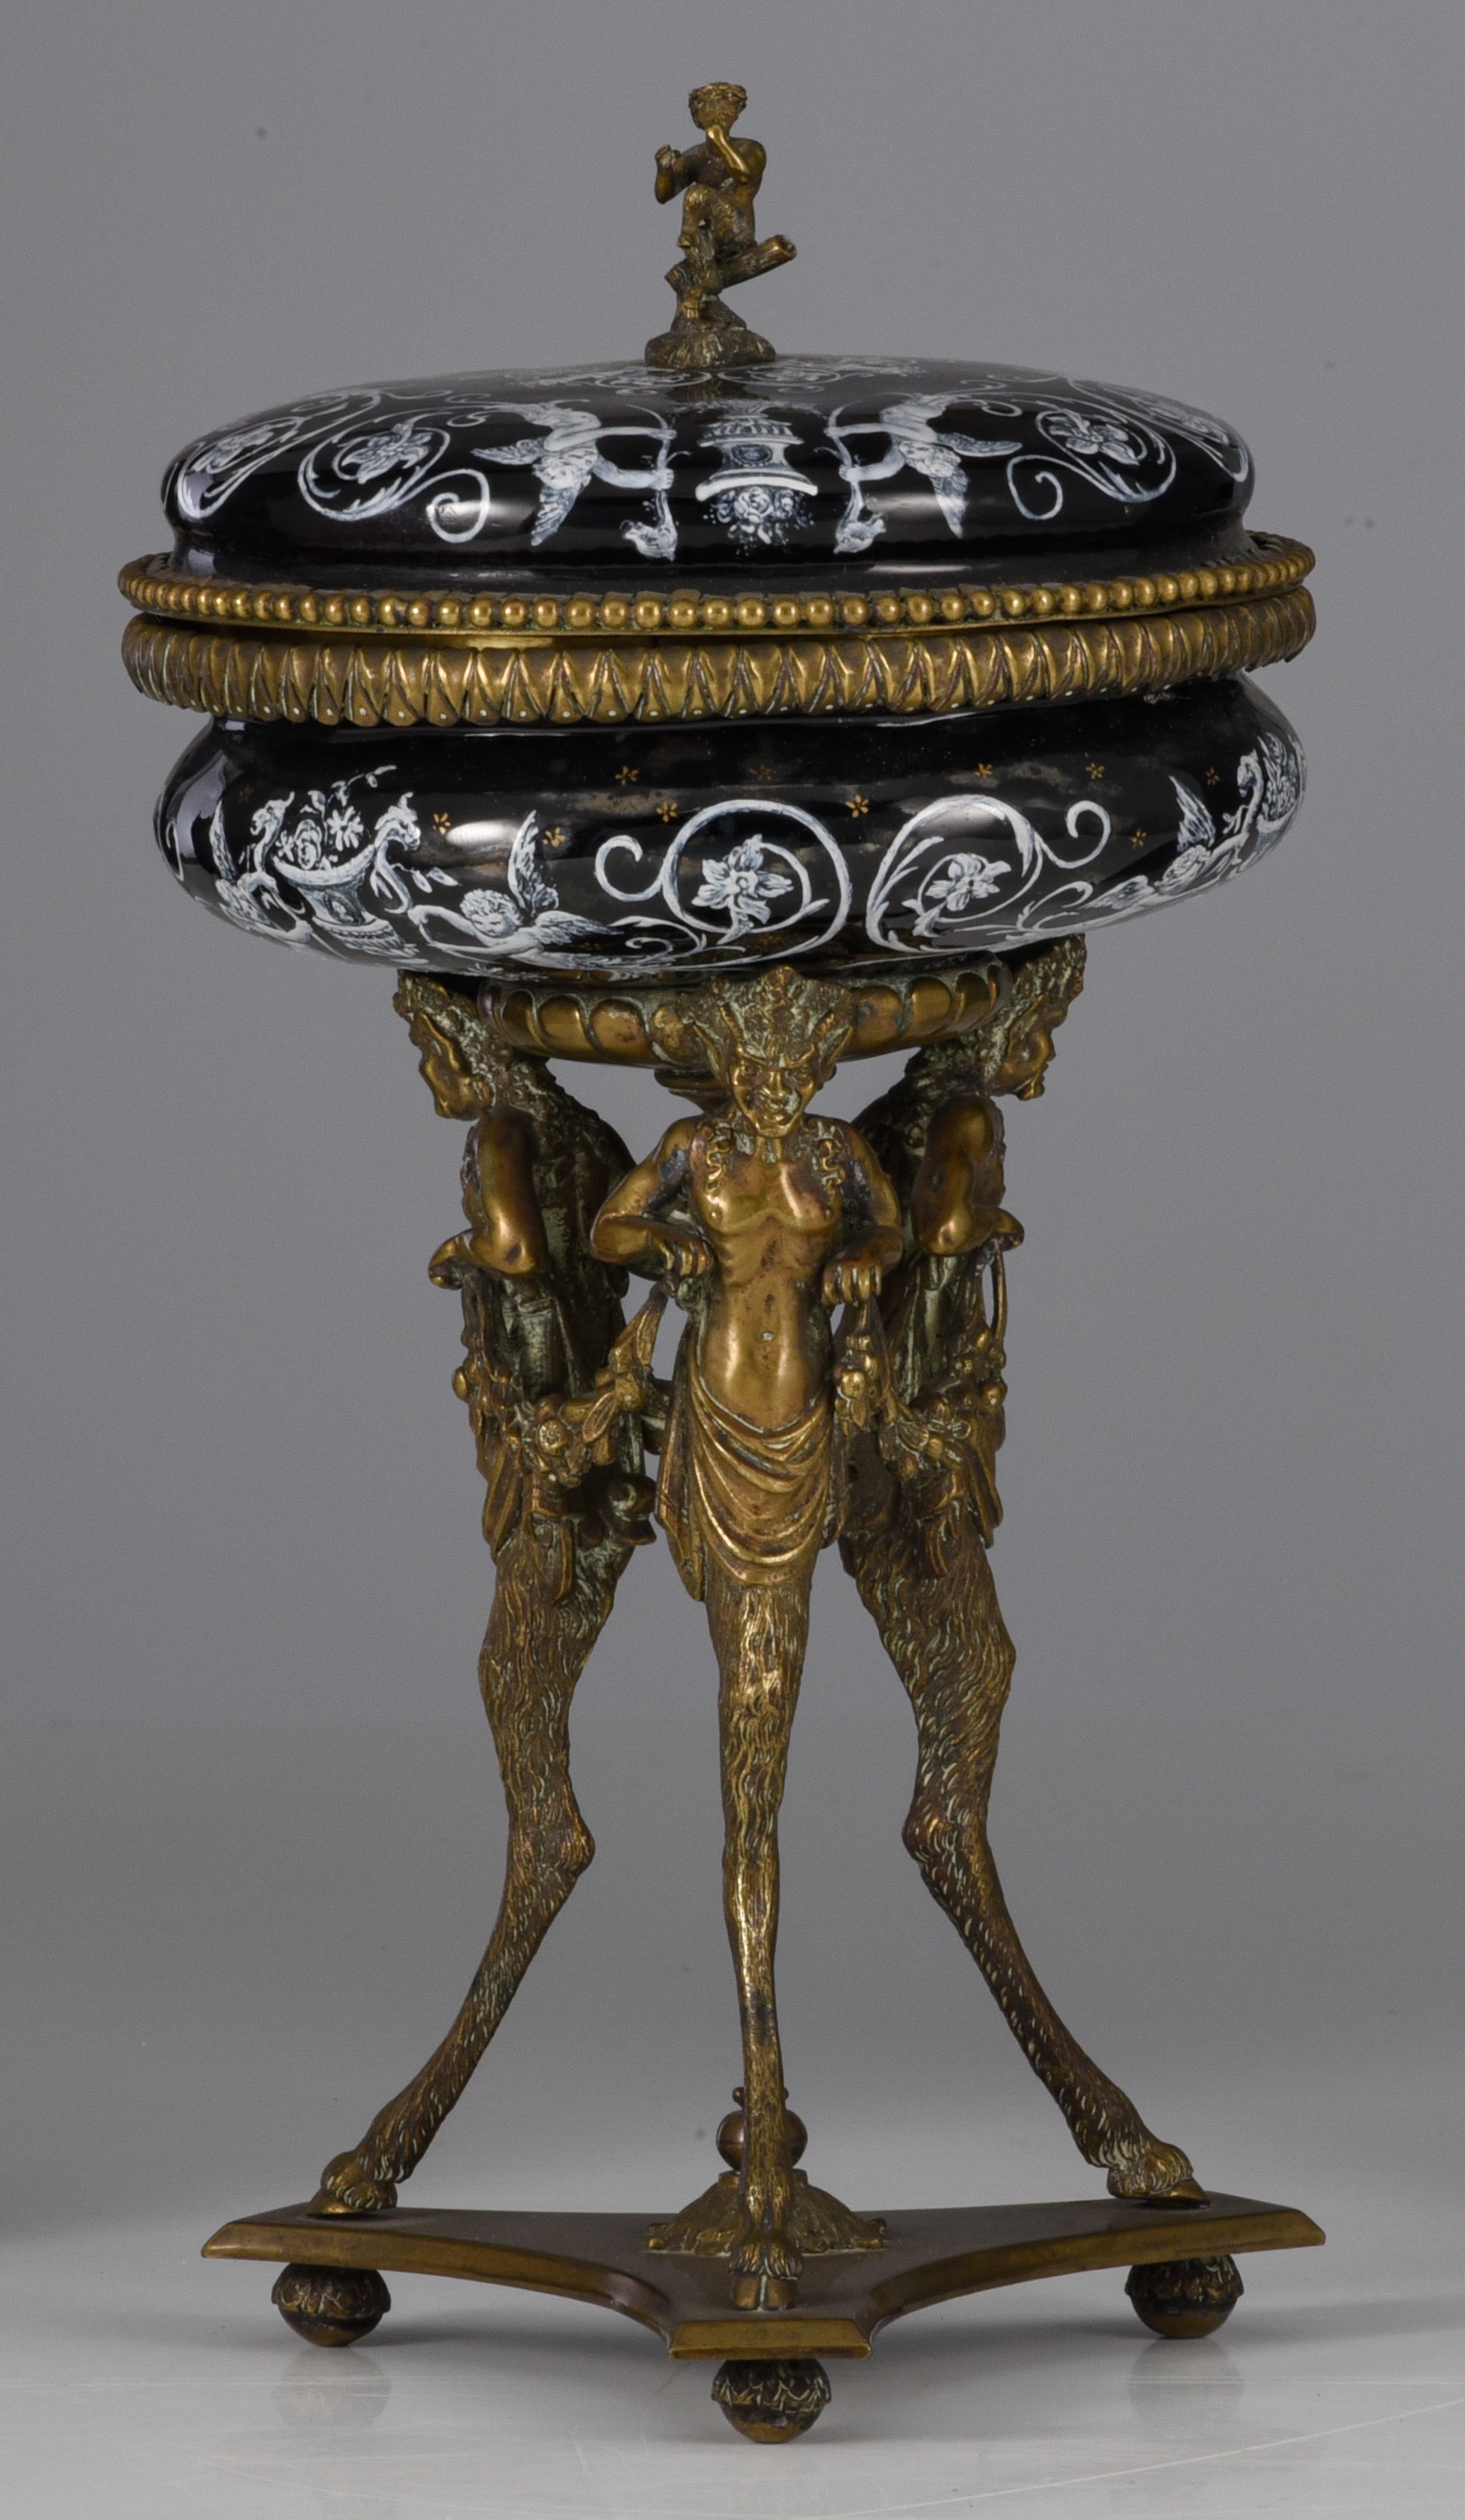 A Limoges enamel box with cover and a tazza with cover, Napoleon III period, H 8 - 23 cm - Image 10 of 16